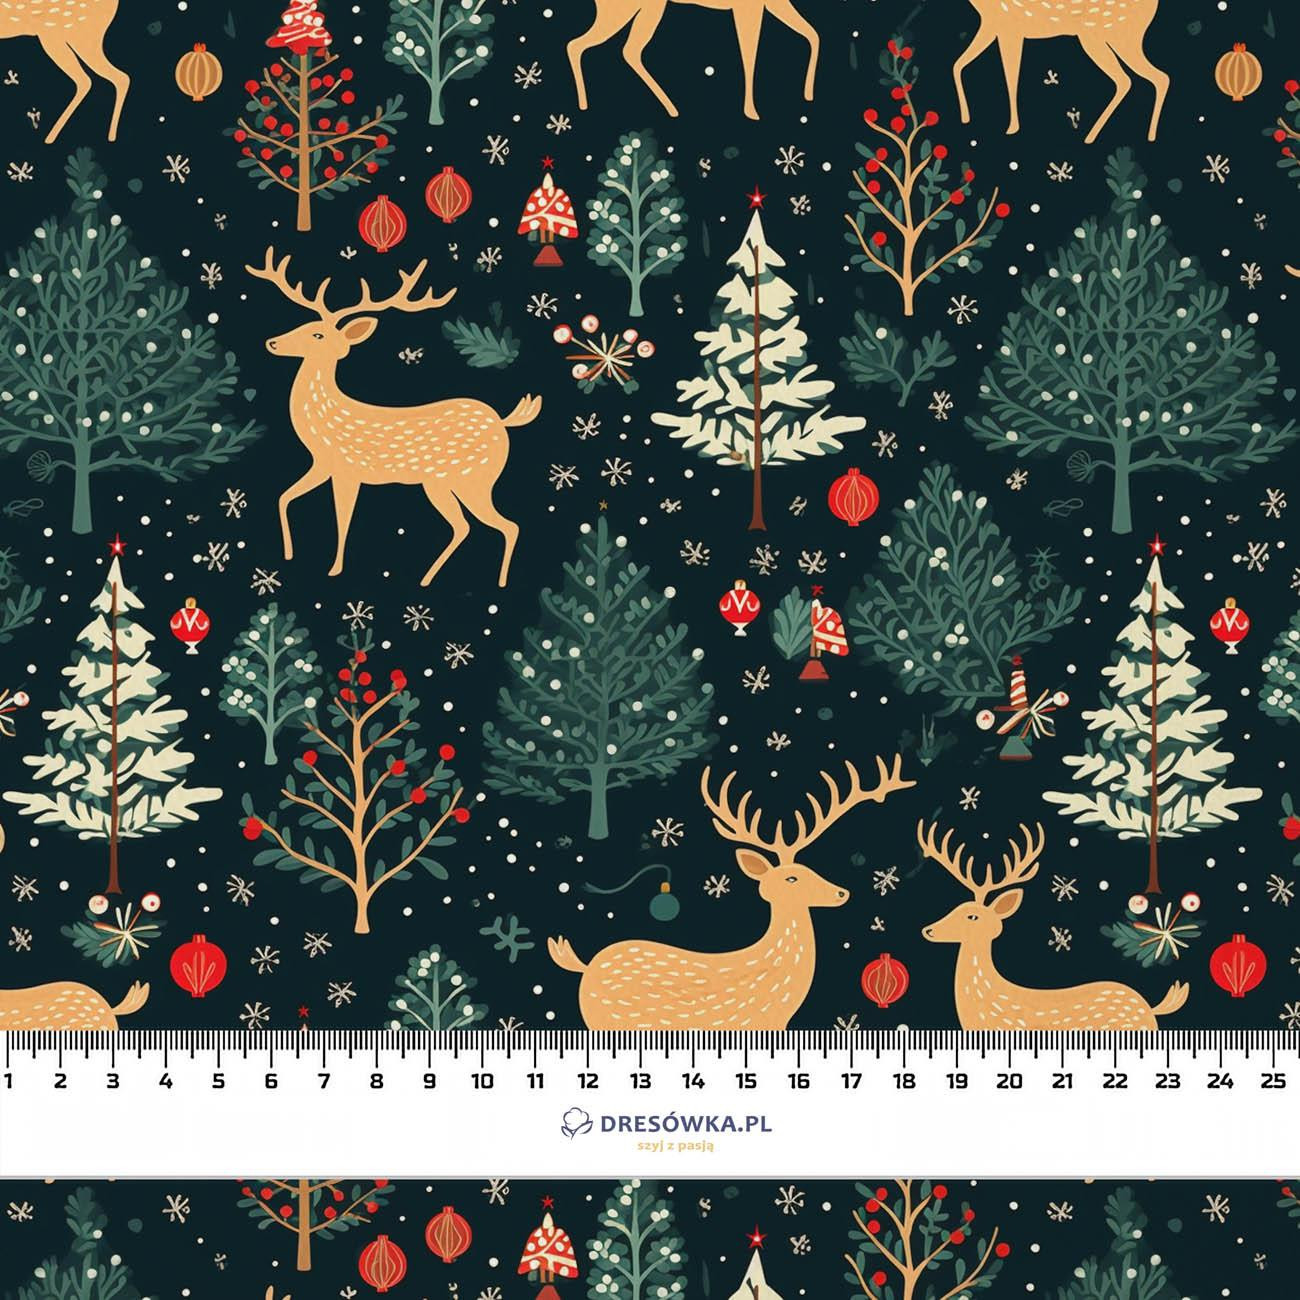 CHRISTMAS FOREST - Waterproof woven fabric